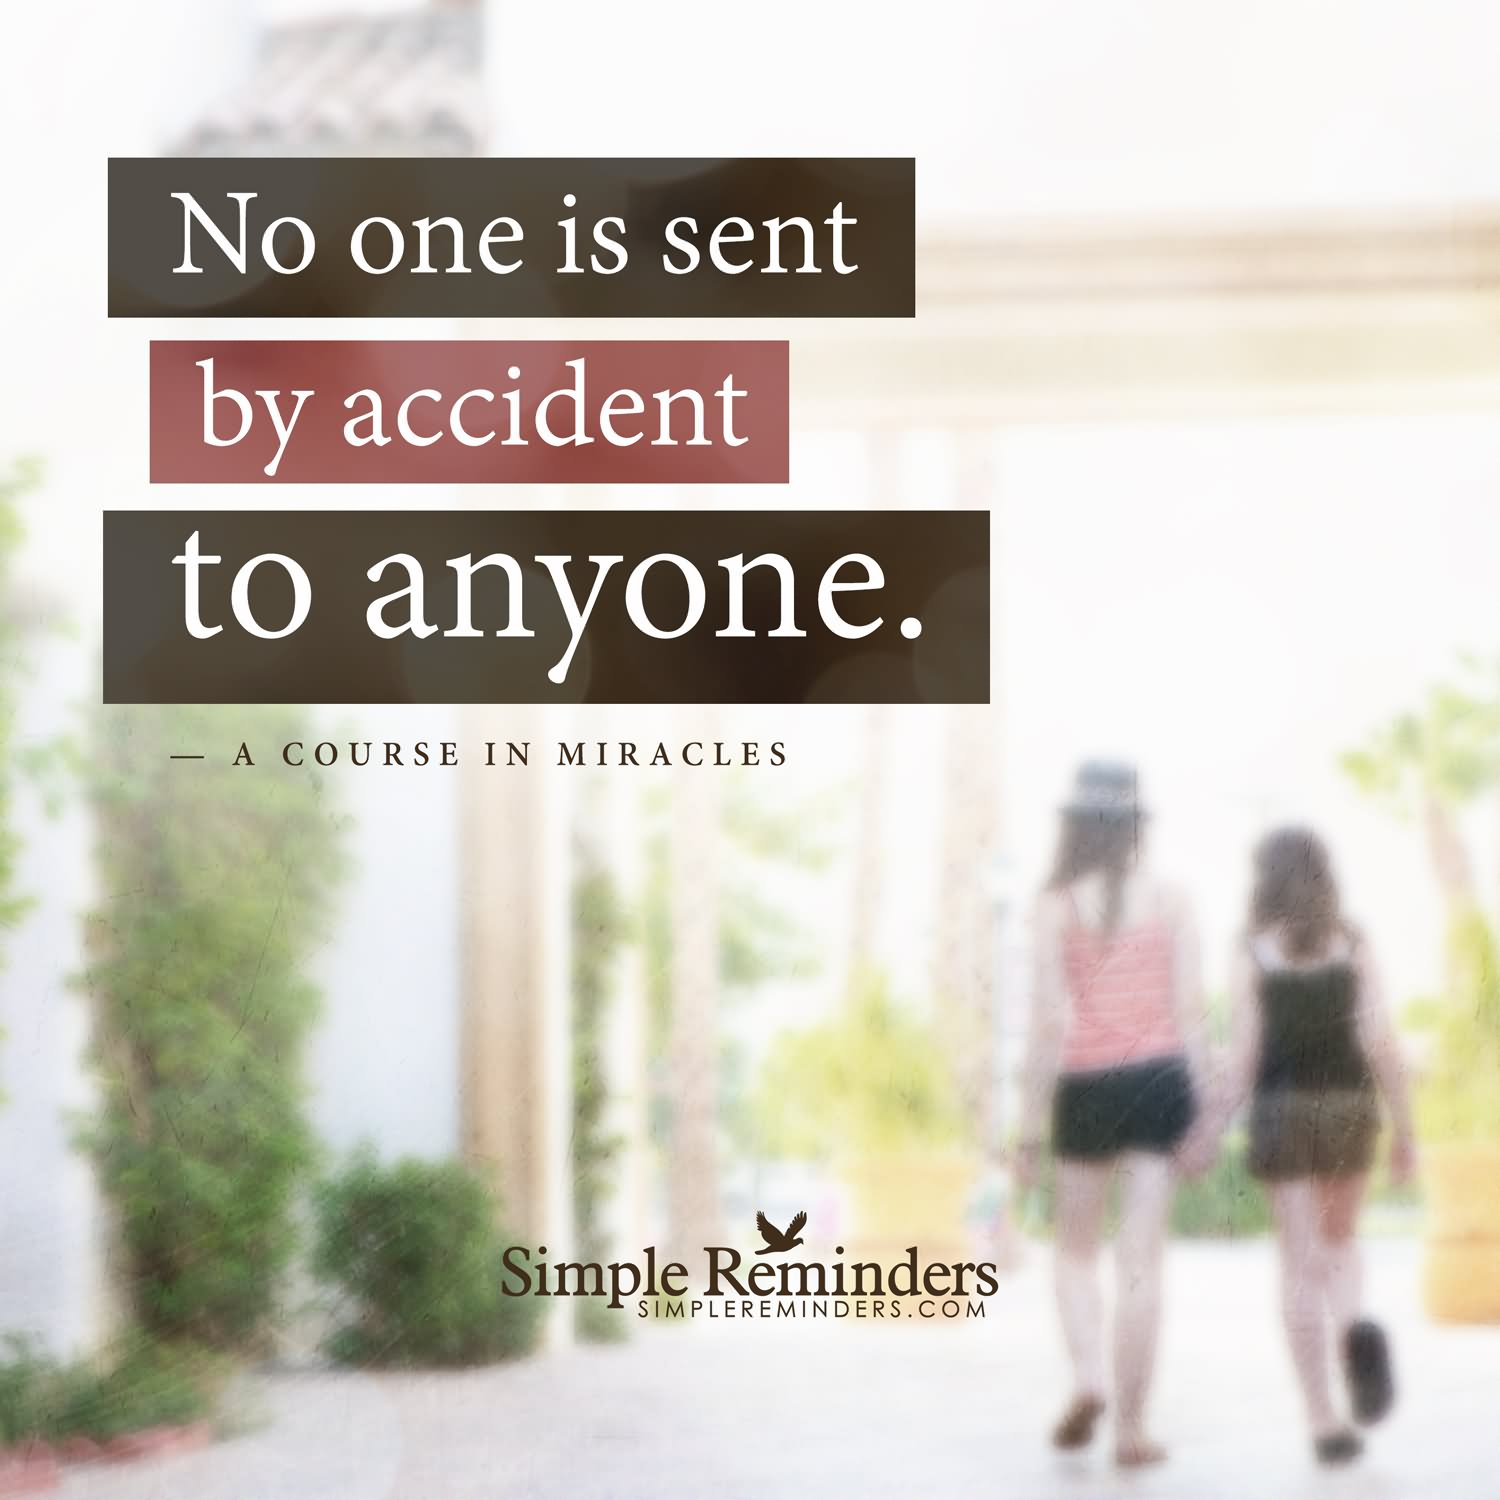 No one is sent by accident to anyone